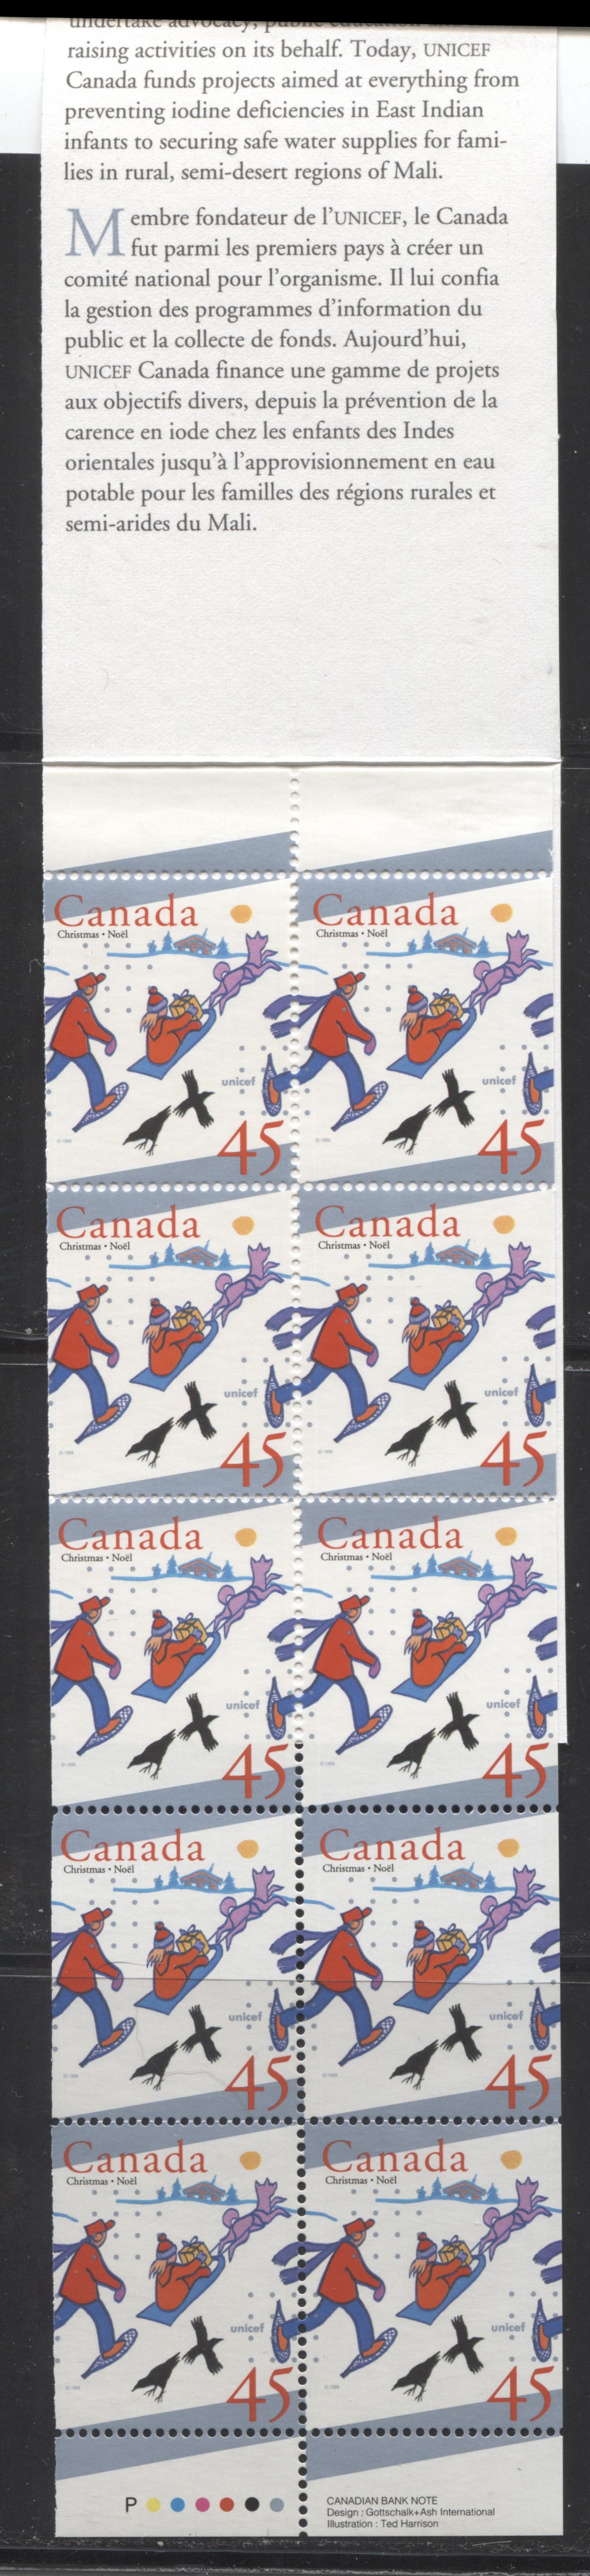 Canada #BK196a-b 1996 Christmas Issue, Complete $4.50 Booklet, Peterborough Paper, Dull Paper, 4 mm GT-2 Tagging Brixton Chrome 